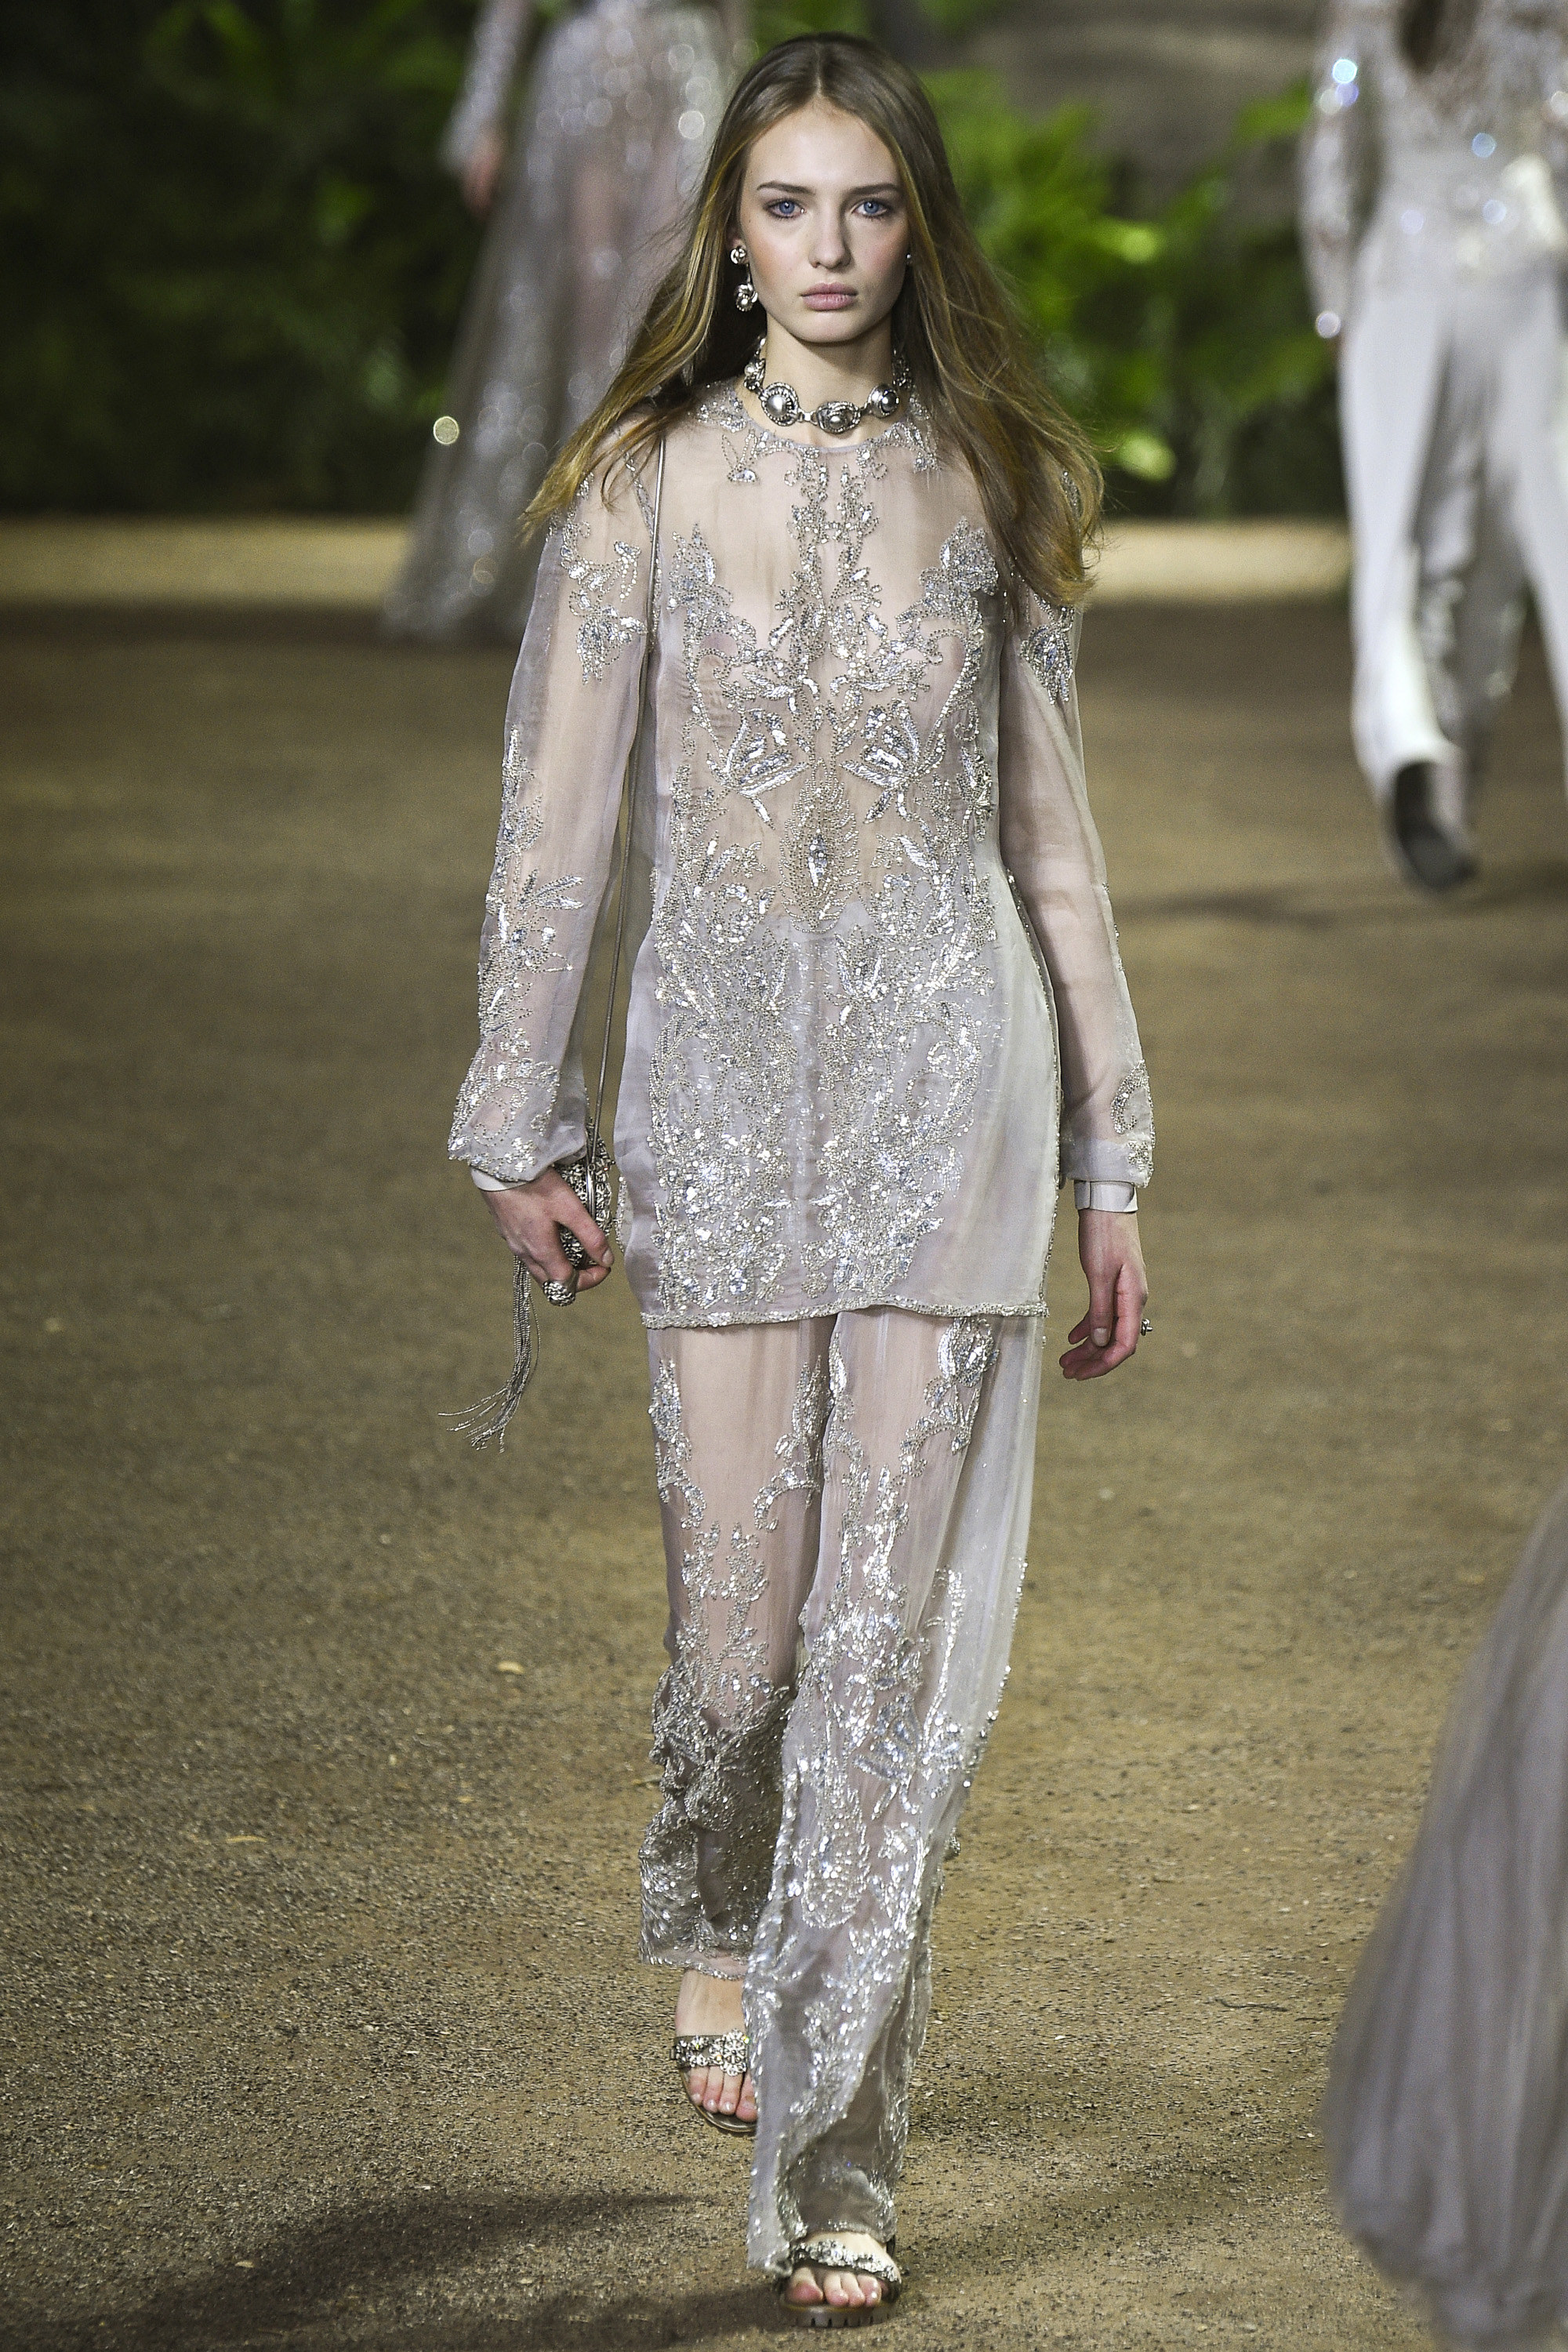 Elie Saab Spring 2016 Couture Collection | MiKADO